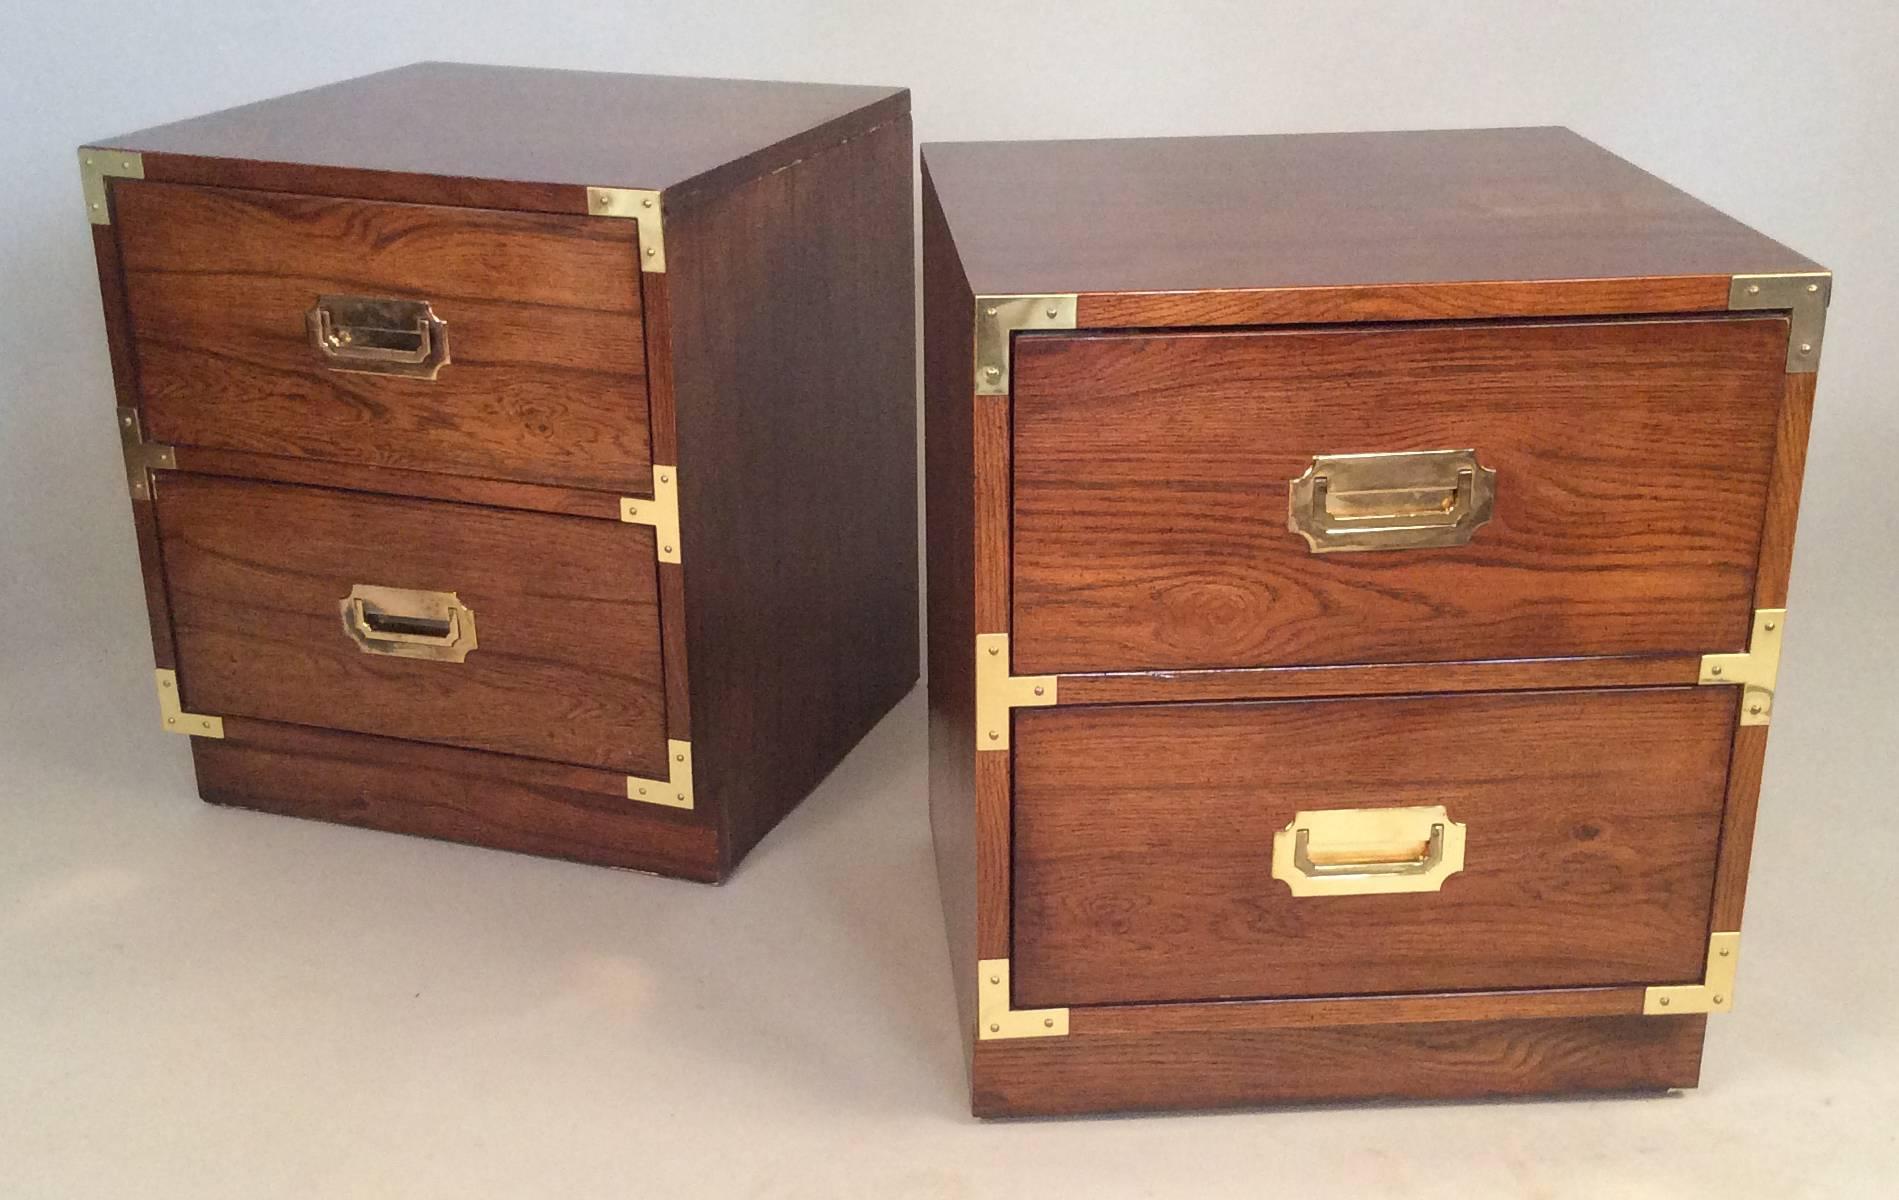 A very handsome pair of two-drawer campaign style nightstands by Bernhardt, with beautiful walnut graining and brass corners and hardware.